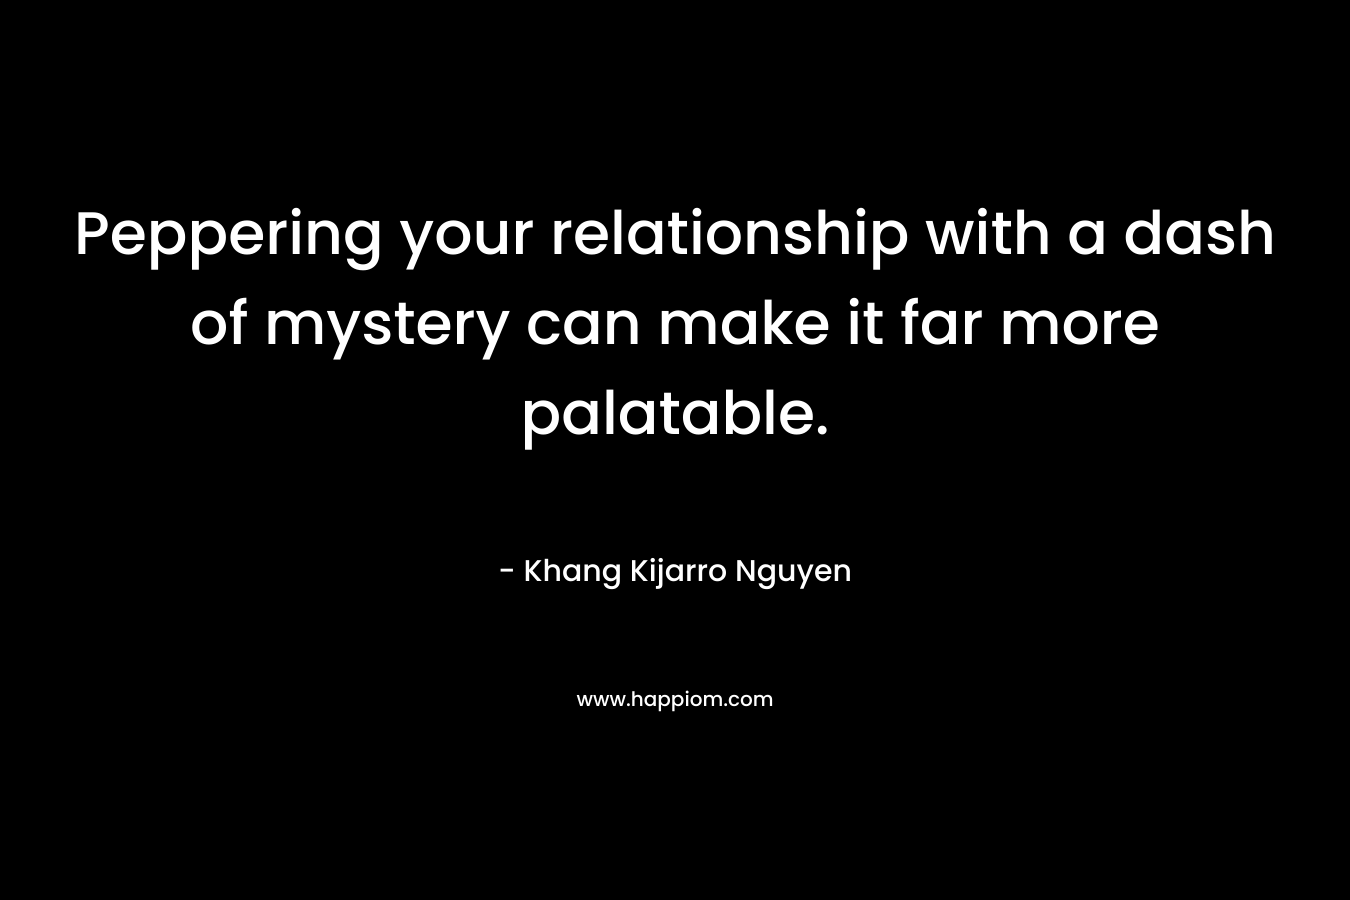 Peppering your relationship with a dash of mystery can make it far more palatable. – Khang Kijarro Nguyen